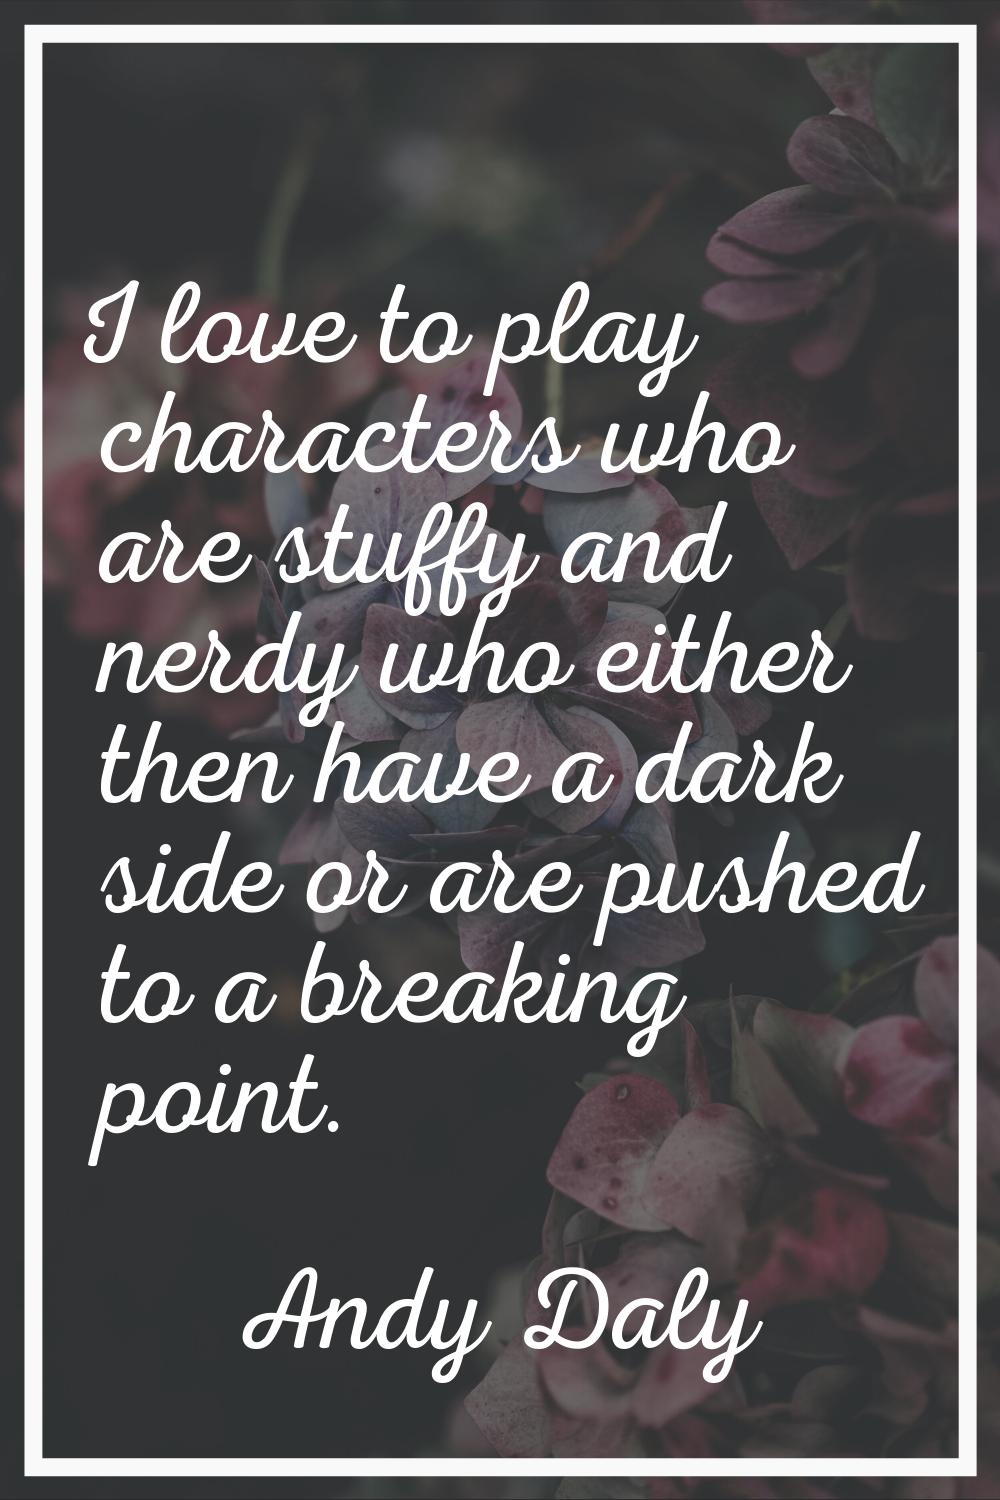 I love to play characters who are stuffy and nerdy who either then have a dark side or are pushed t